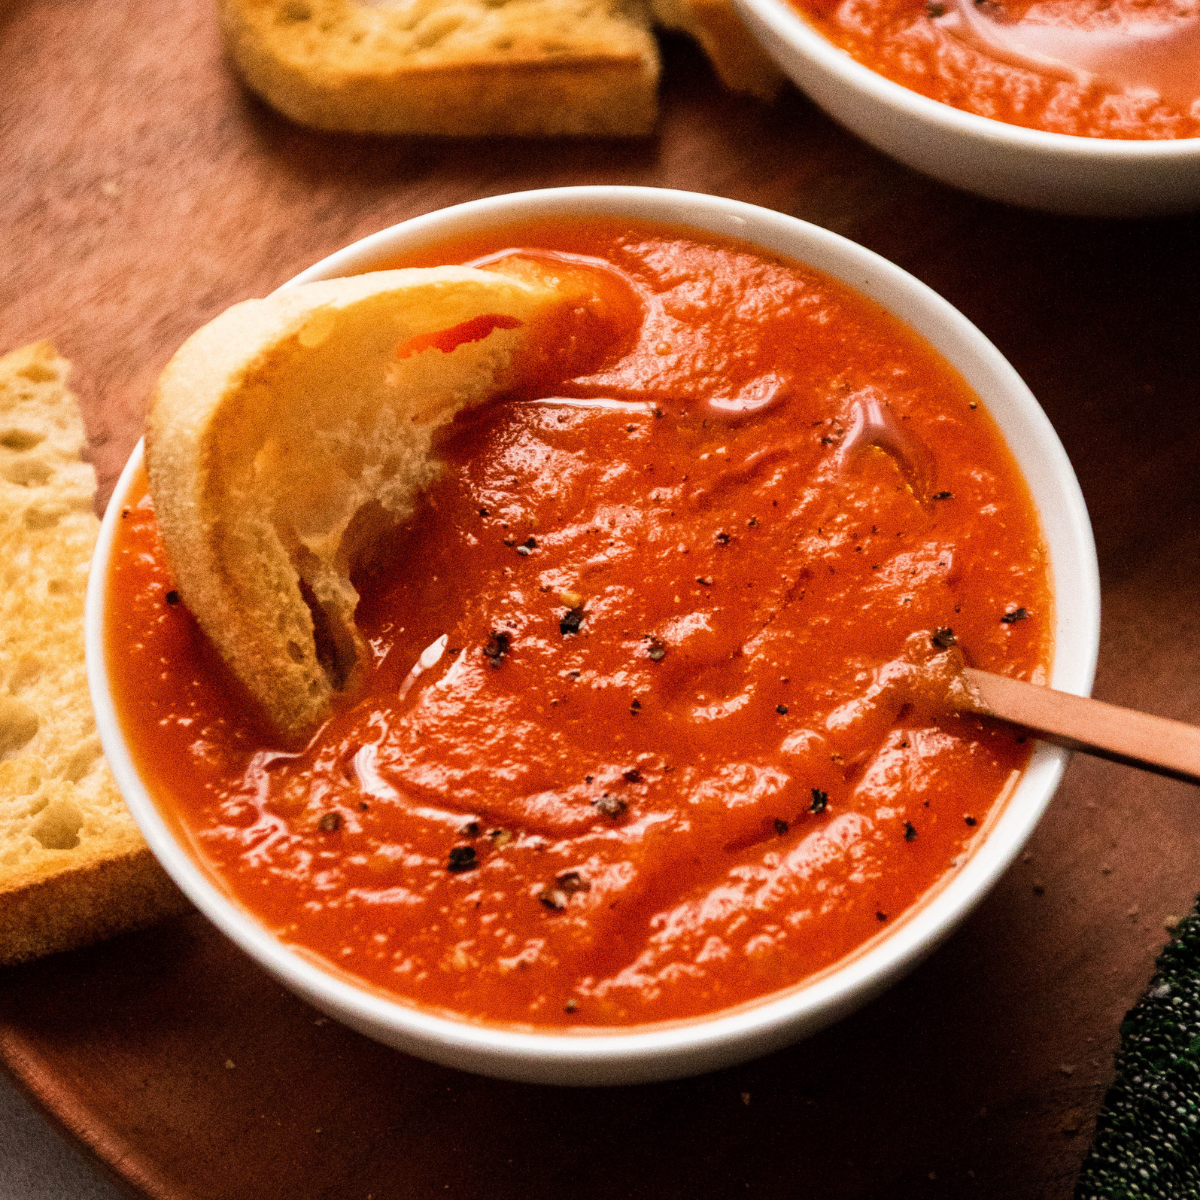 Tomato soup in a white bowl, with a copper spoon and a slice of bread.